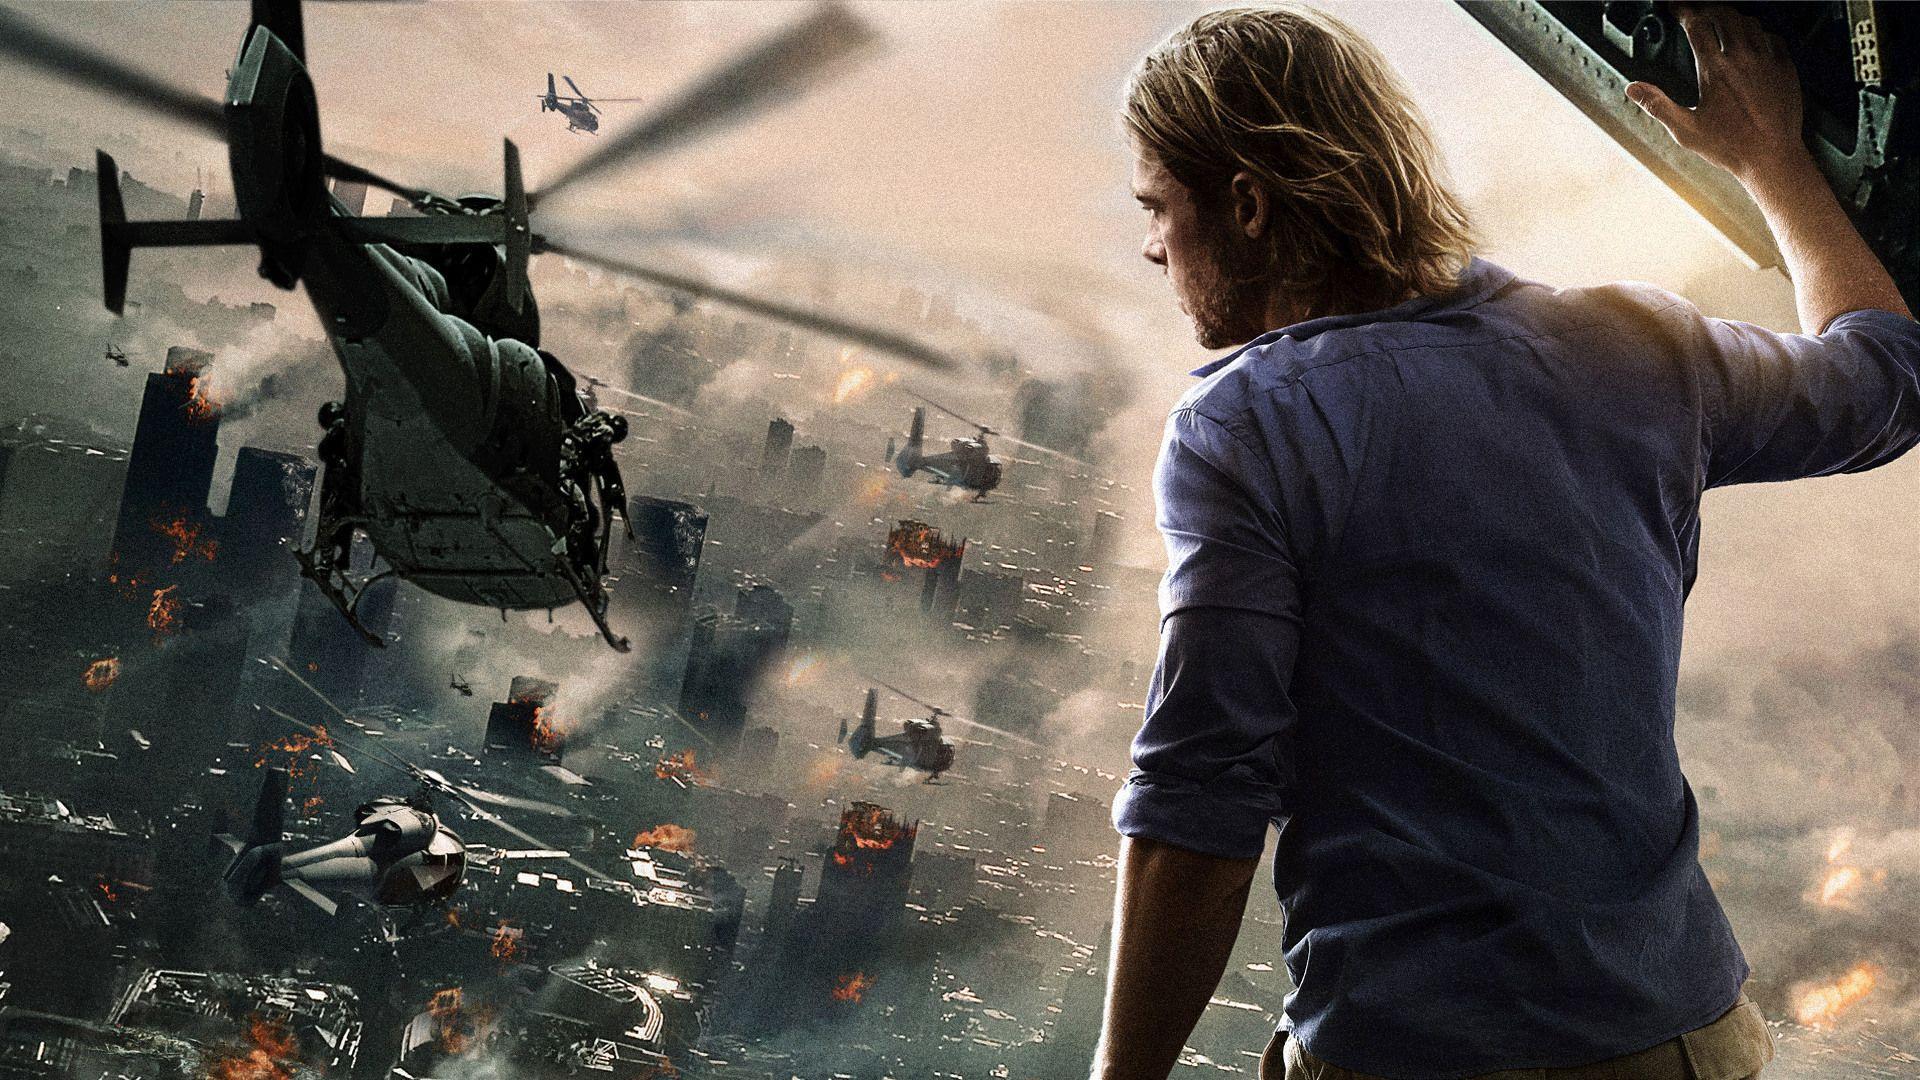 World War Z 2' Set To Begin Production Ahead Of Schedule